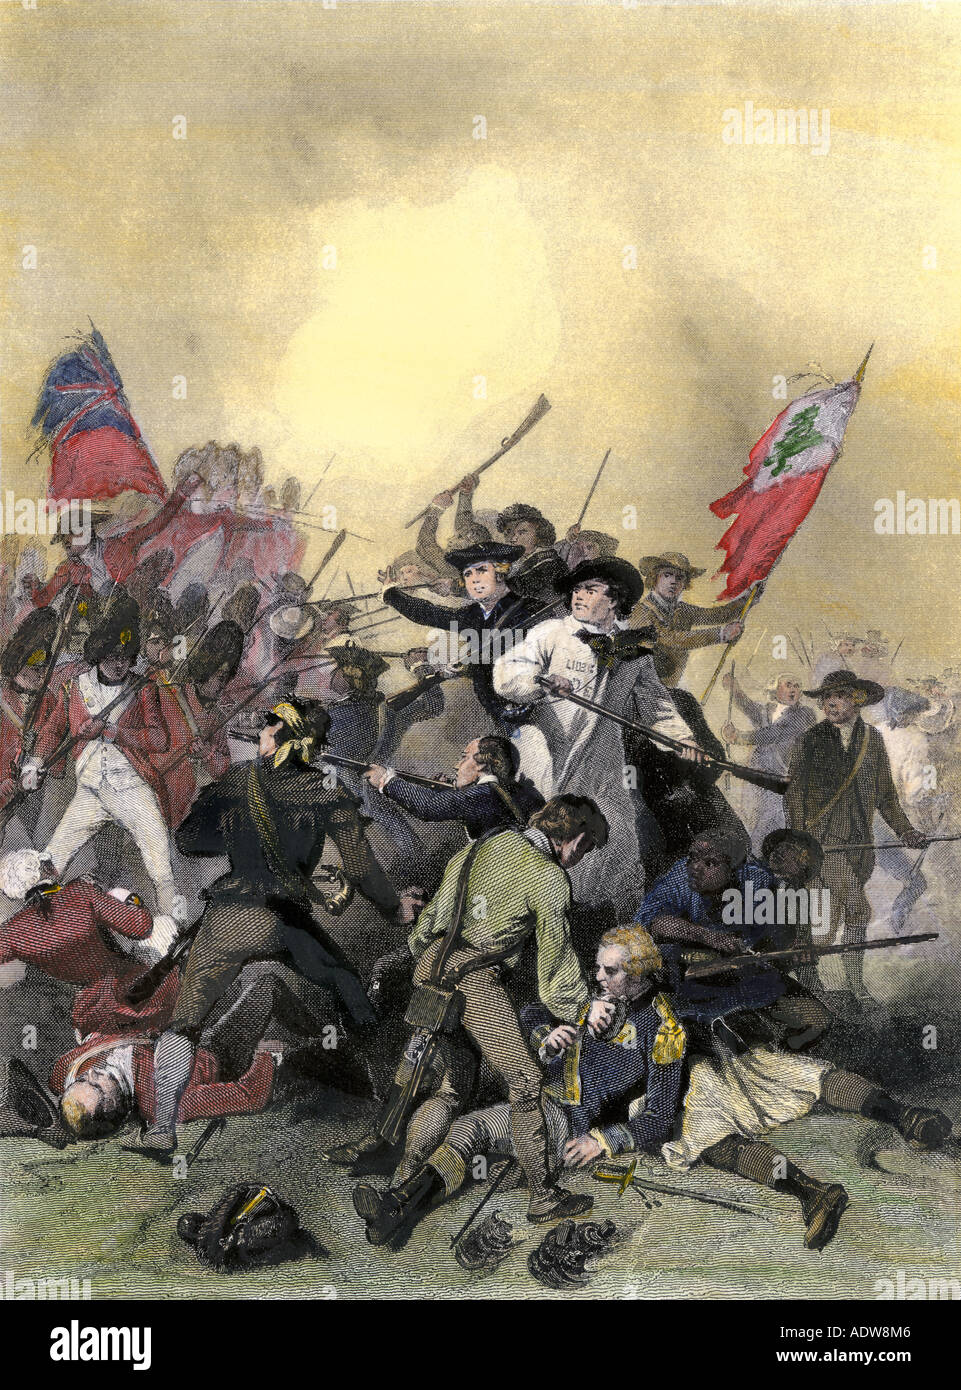 Minutemen at the Battle of Bunker Hill at the outbreak of the American Revolution 1775. Hand-colored steel engraving Stock Photo